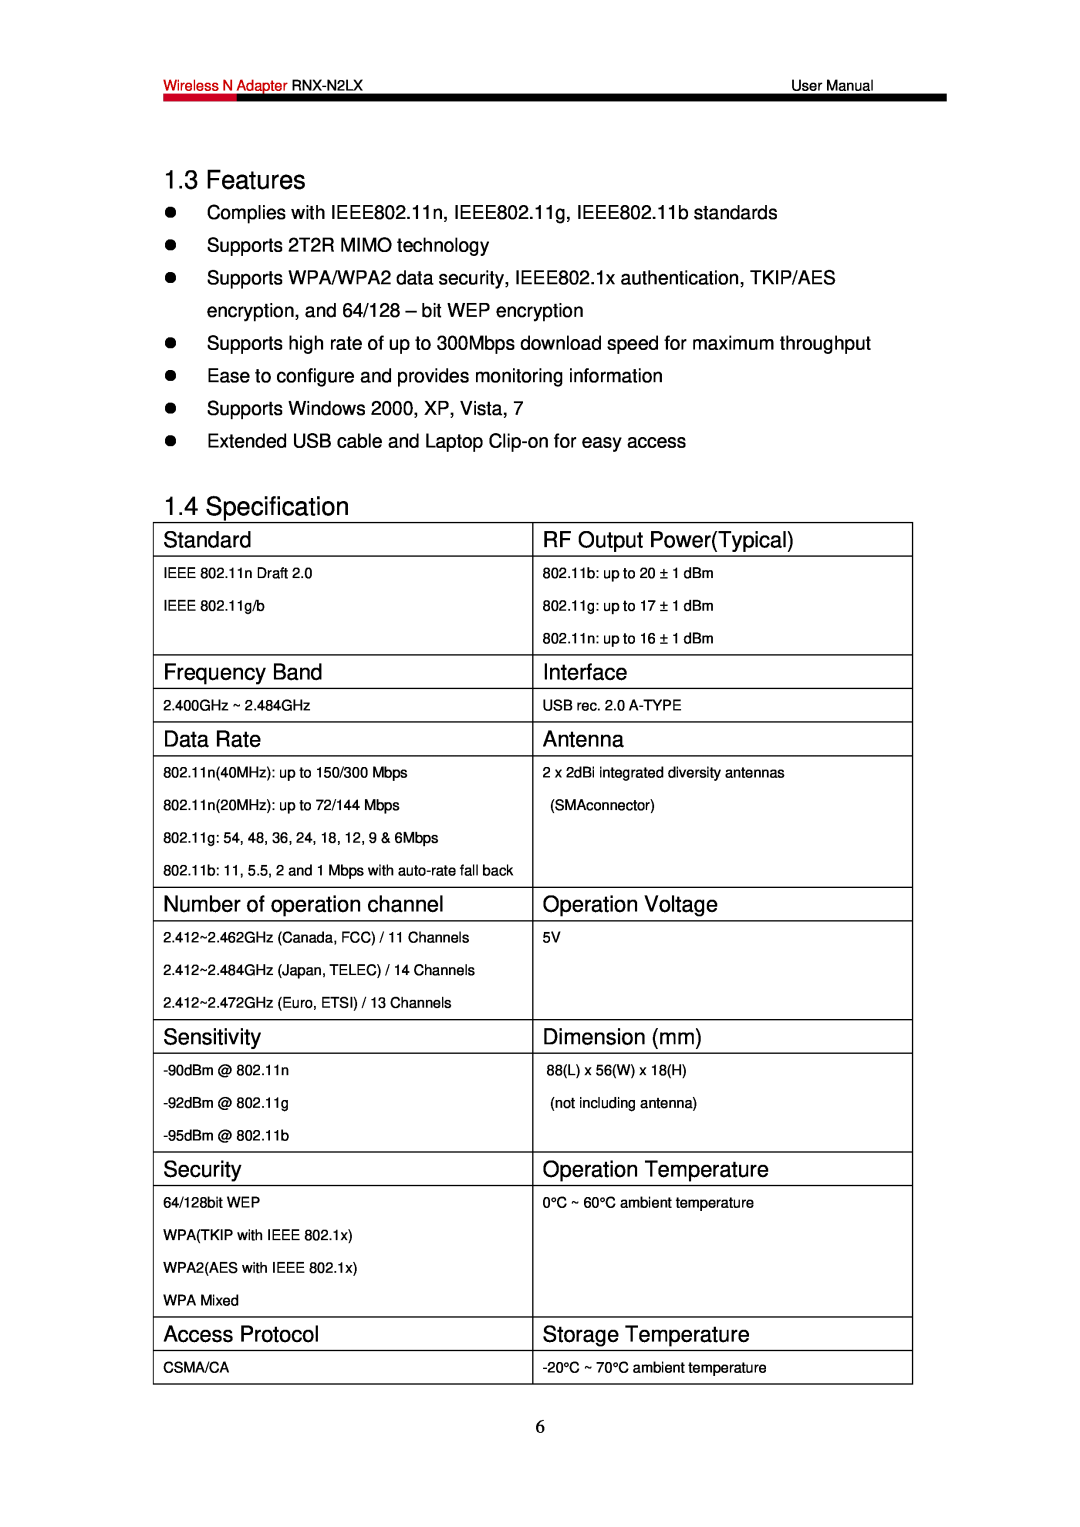 Rosewill RNX-N2LX user manual Features, Specification 